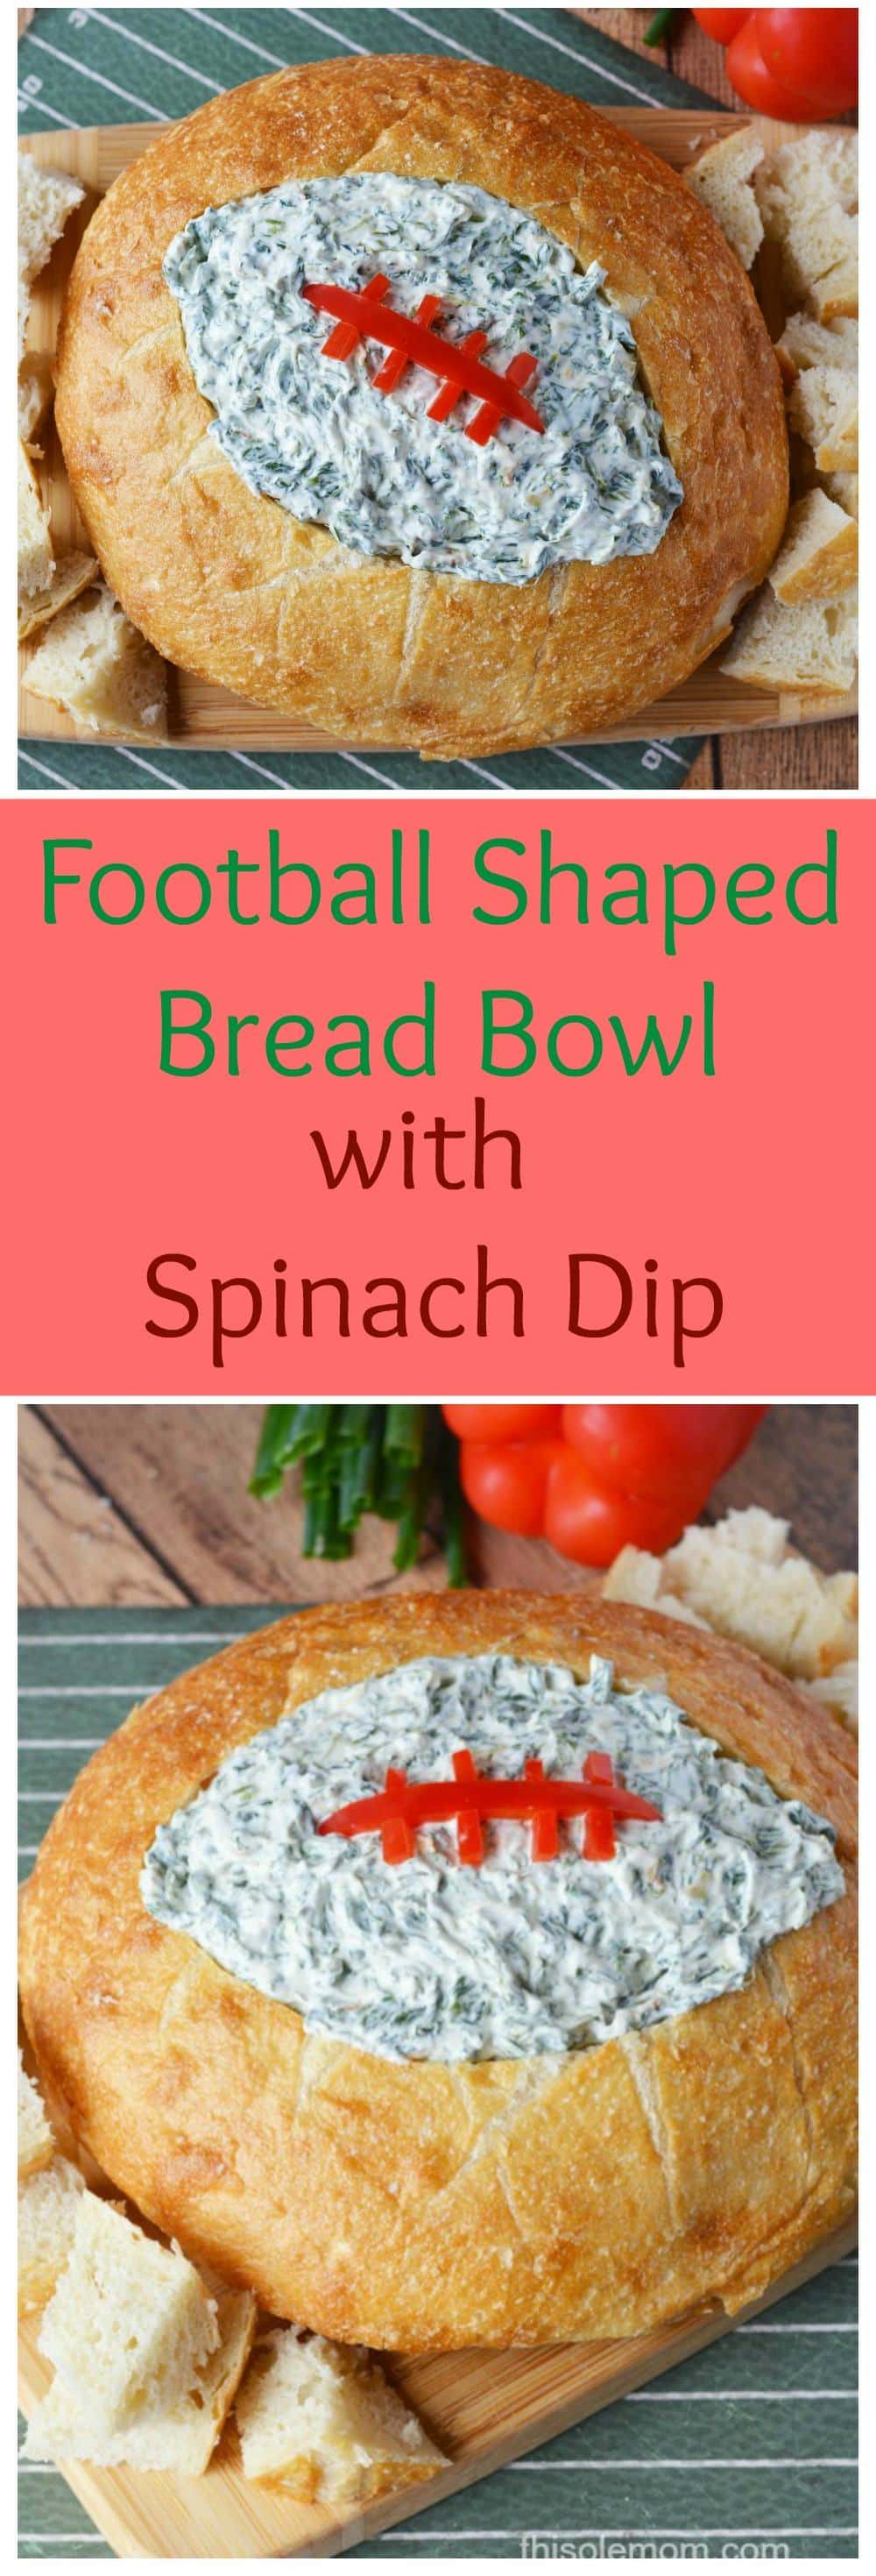 Football Shaped Bread Bowl With Spinach Dip - This Ole Mom